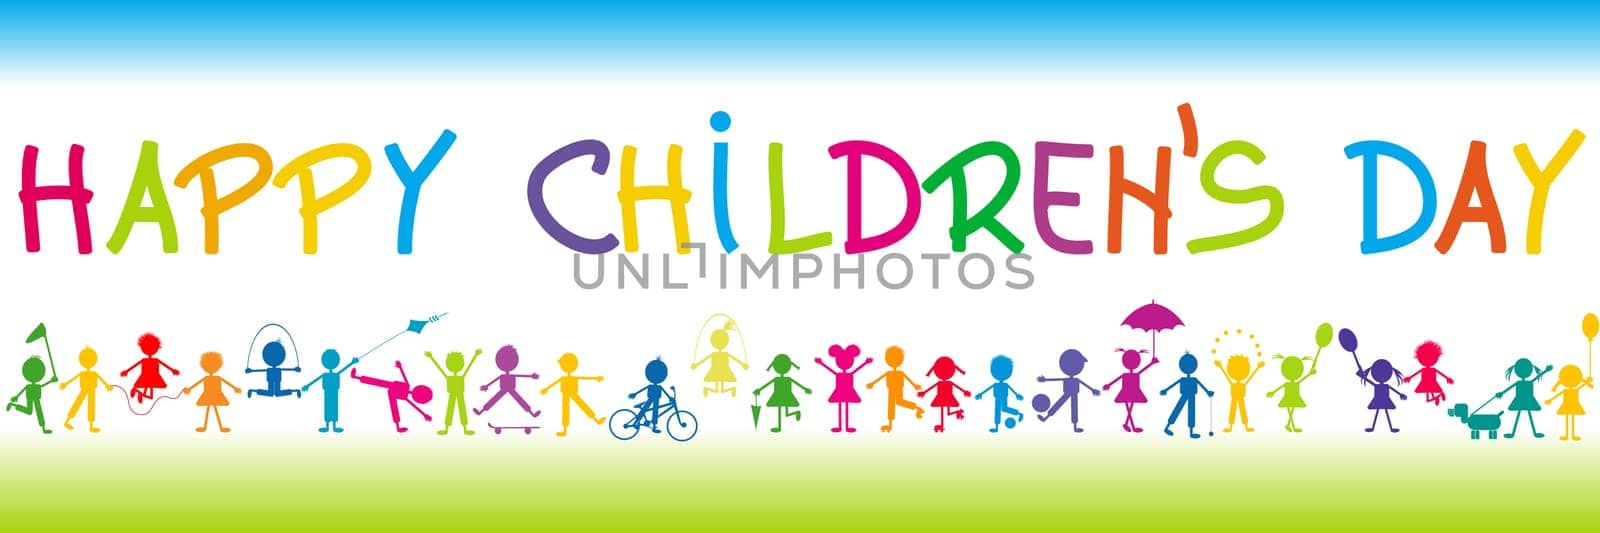 Happy Children's Day poster with stylized children playing